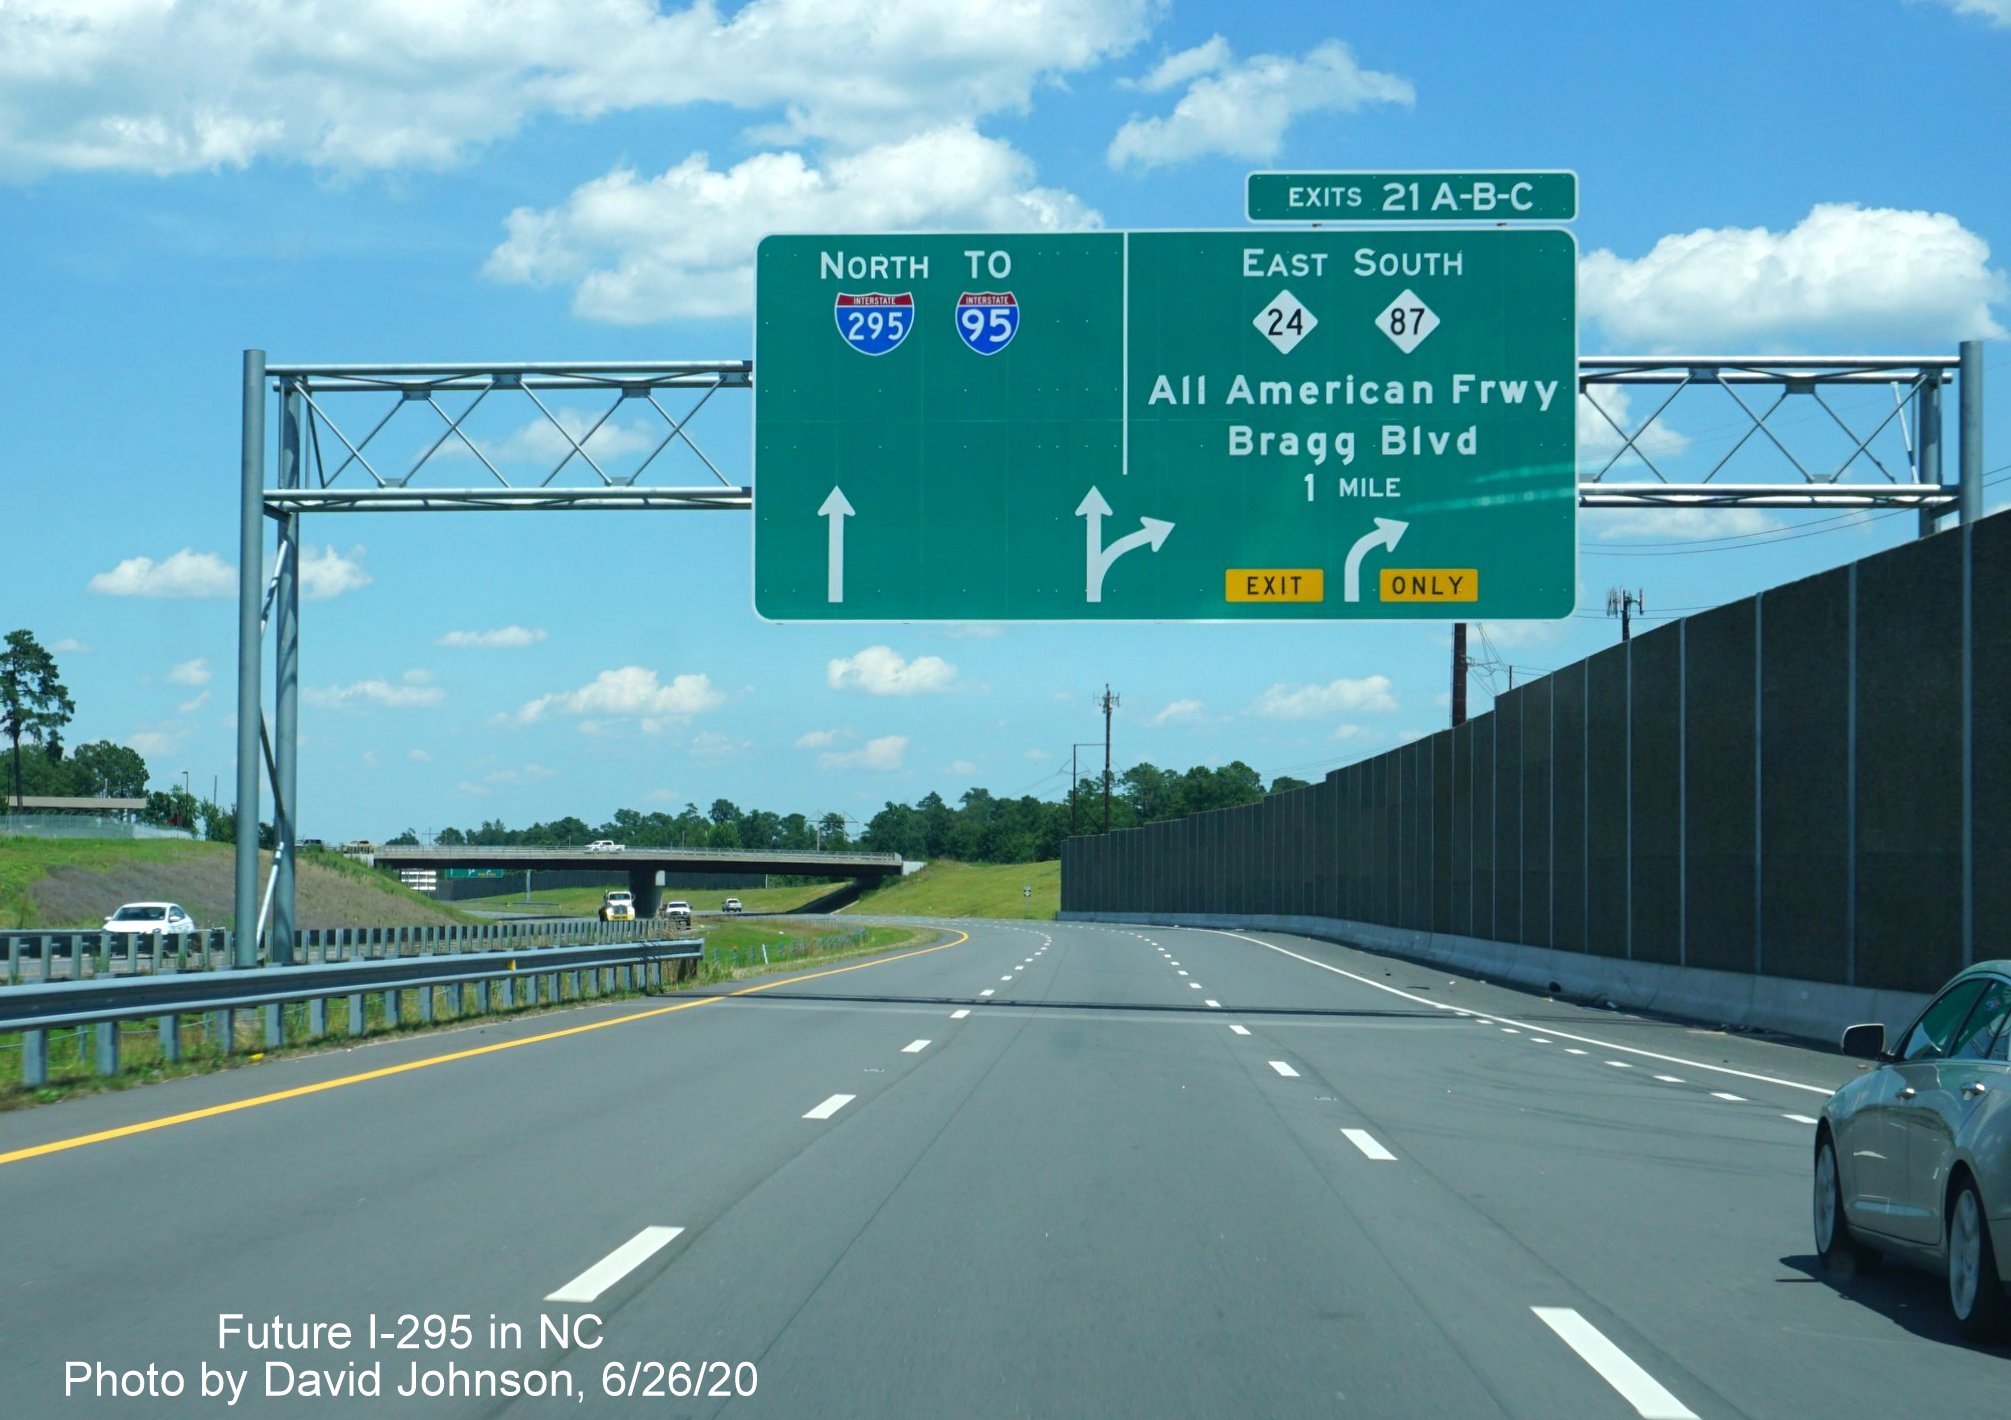 Image of overhead 1-Mile advancce sign for All American Freeway/Bragg Blvd exit with I-295 shield, by David Johnson June 2020